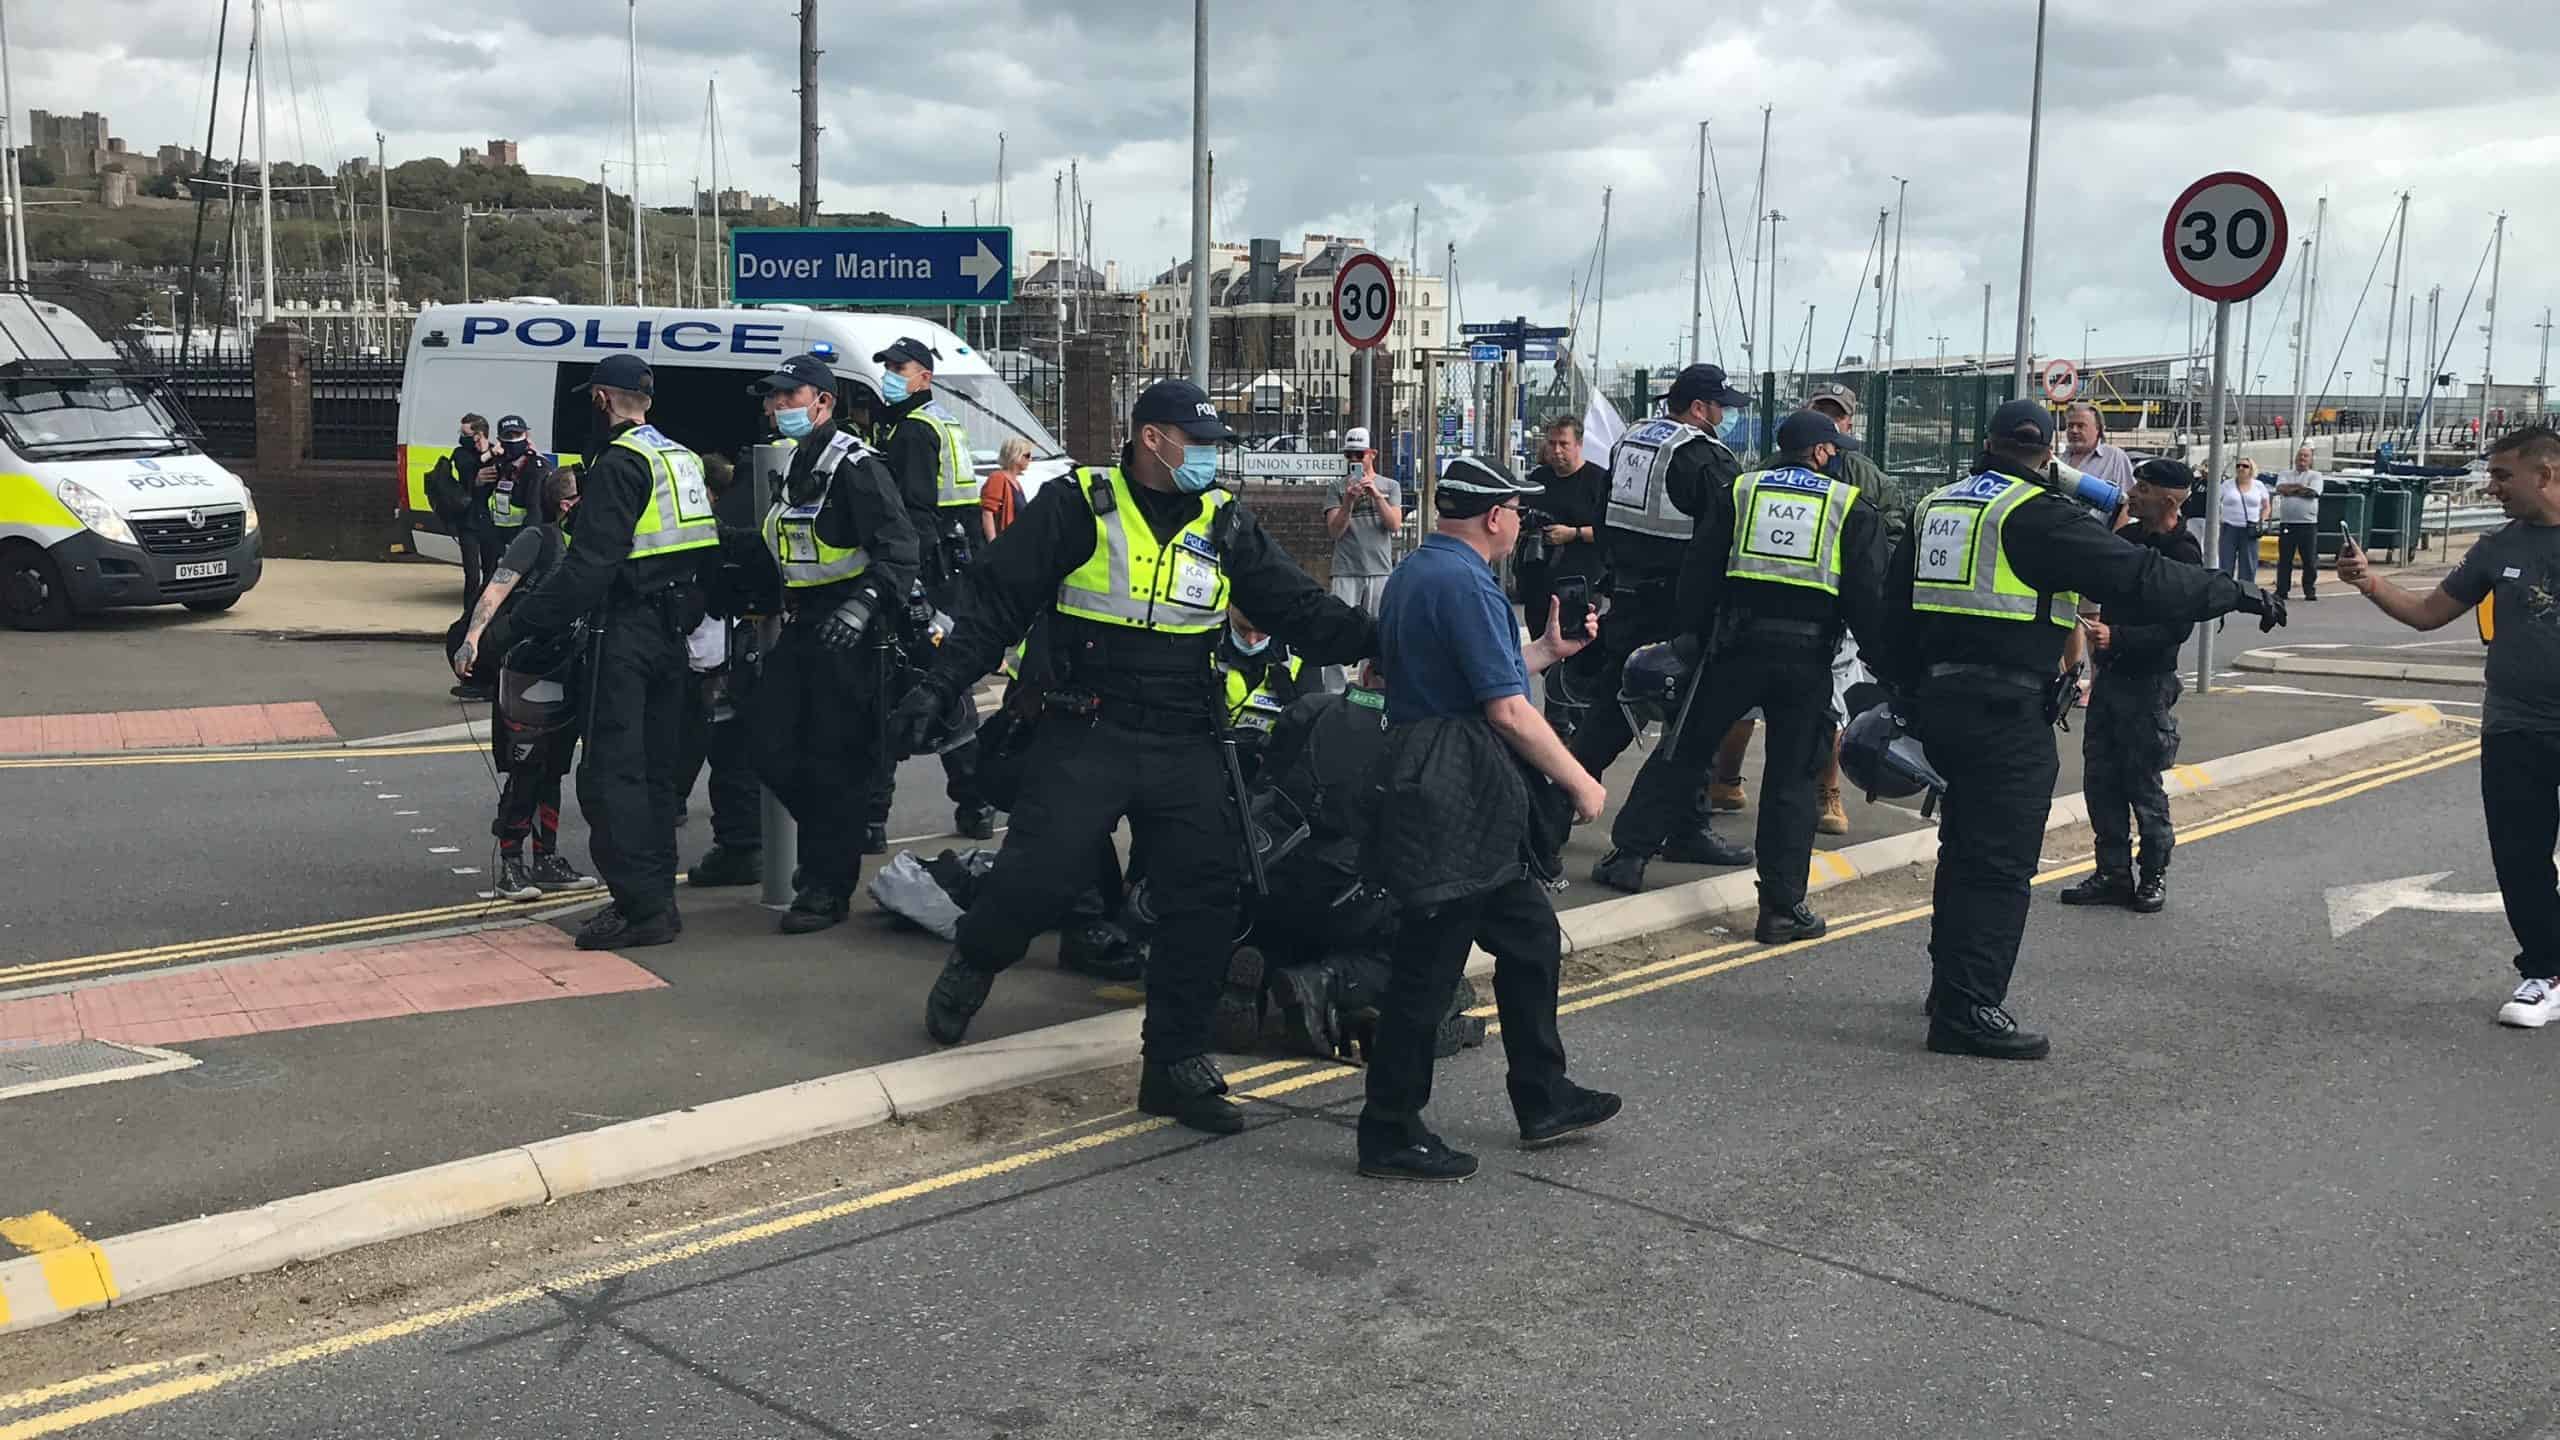 Anti-migrant protesters have clashed with police in Dover